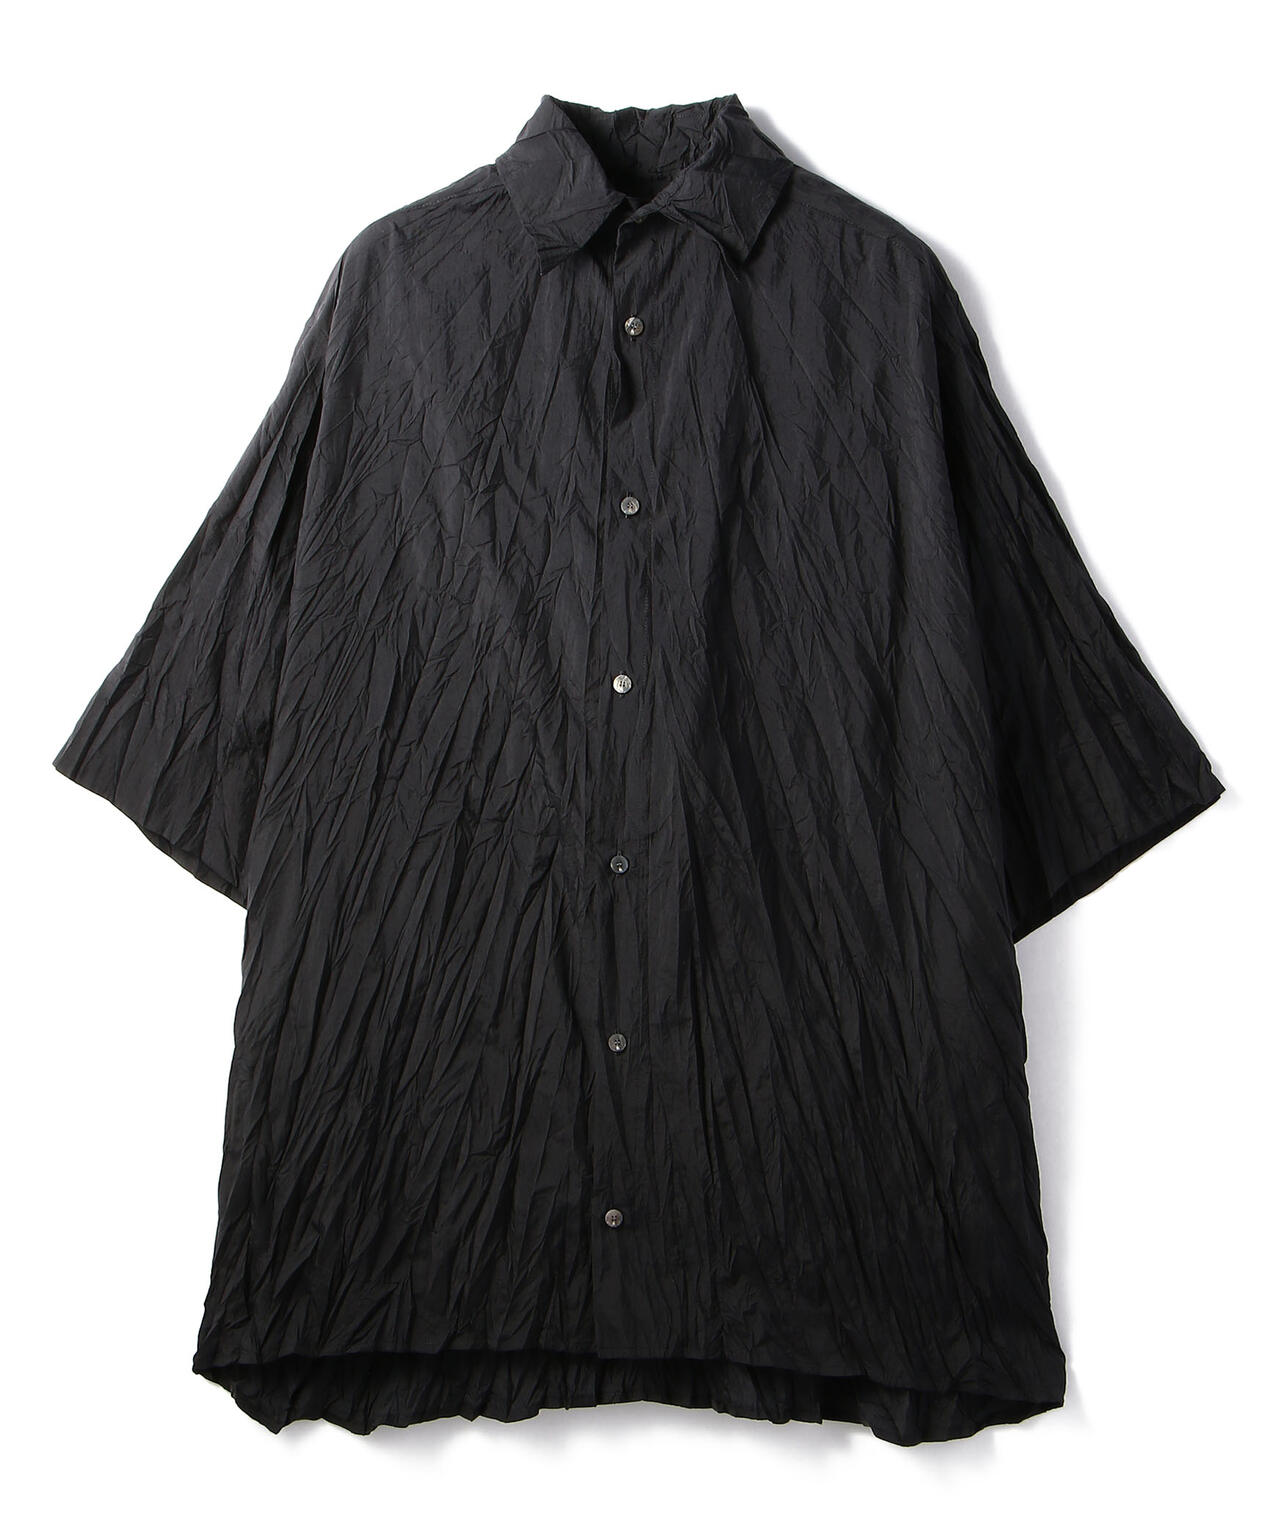 th products（oversized jackets）定価：95,800円